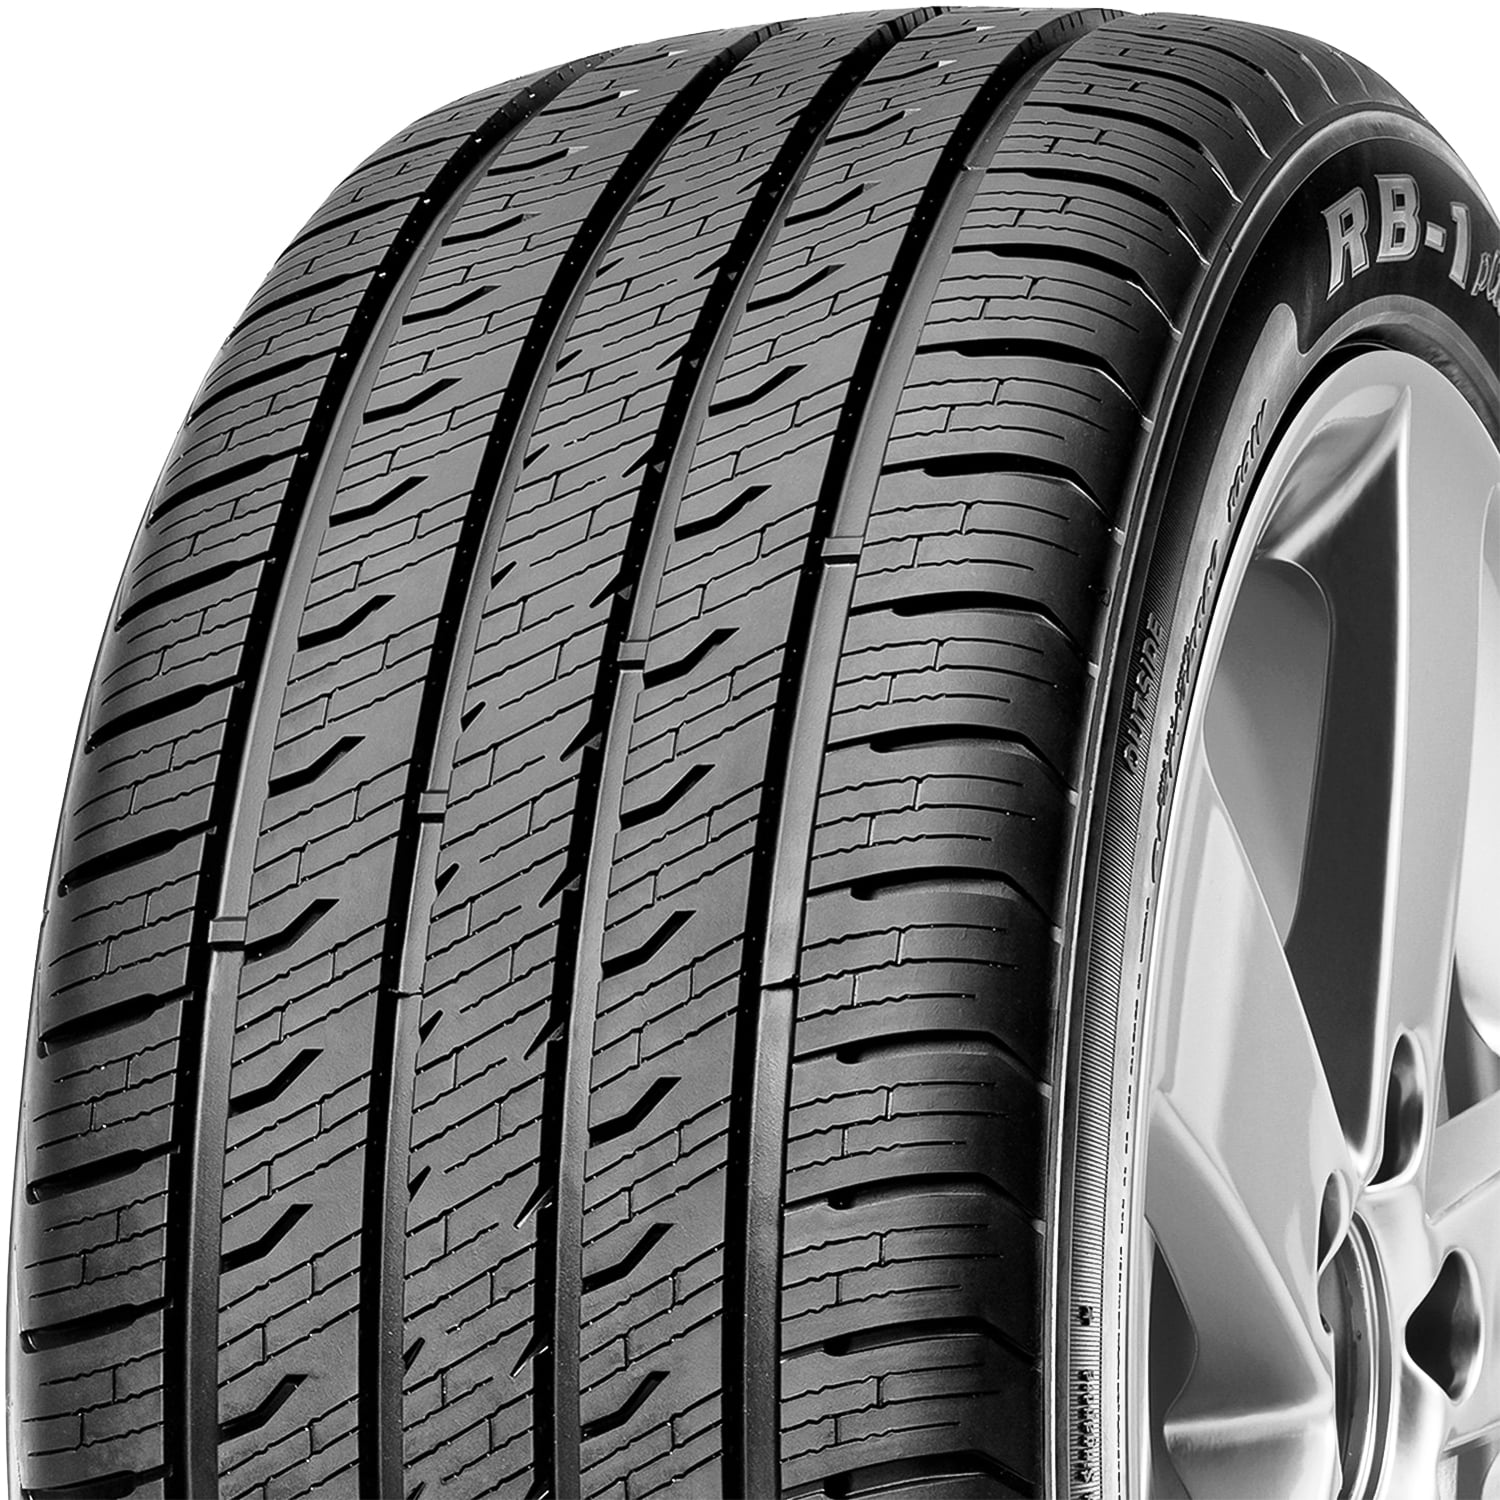 Patriot Tires RB-1 Touring Radial Tire 225/45ZR18 95W